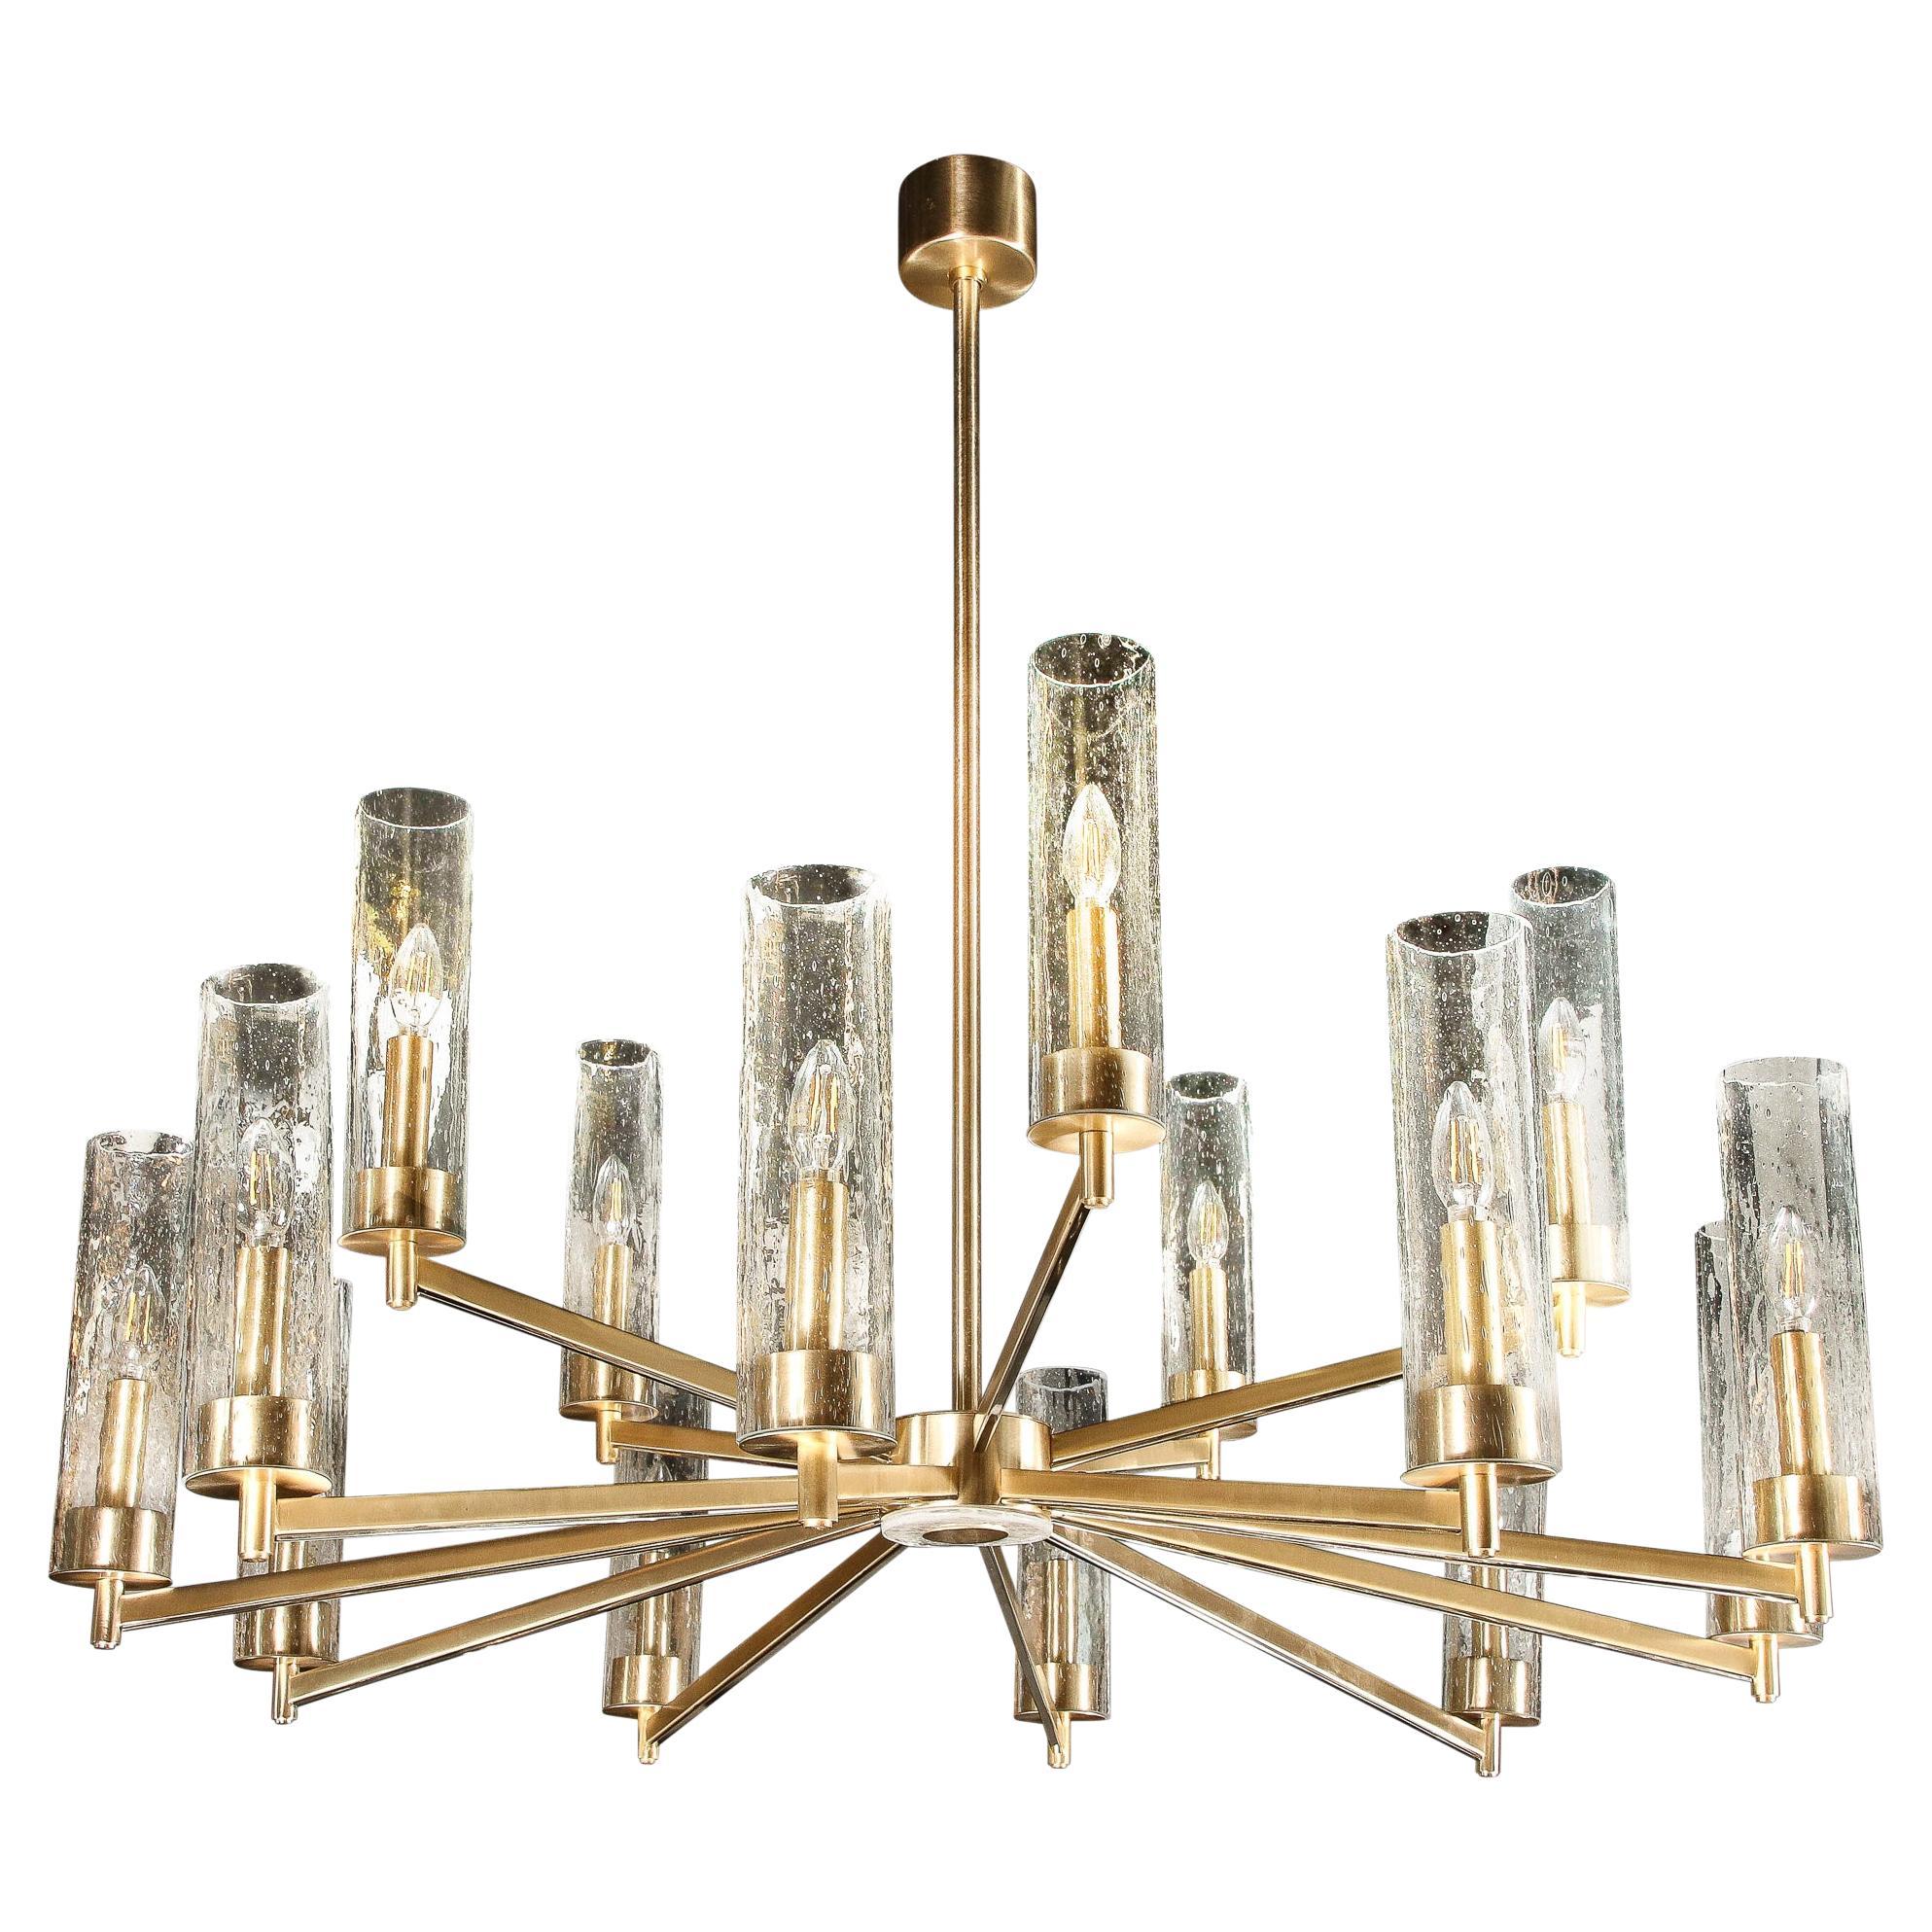 Modernist 15 Arm Chandelier in Brushed Brass & Transparent Cylindrical Shades For Sale